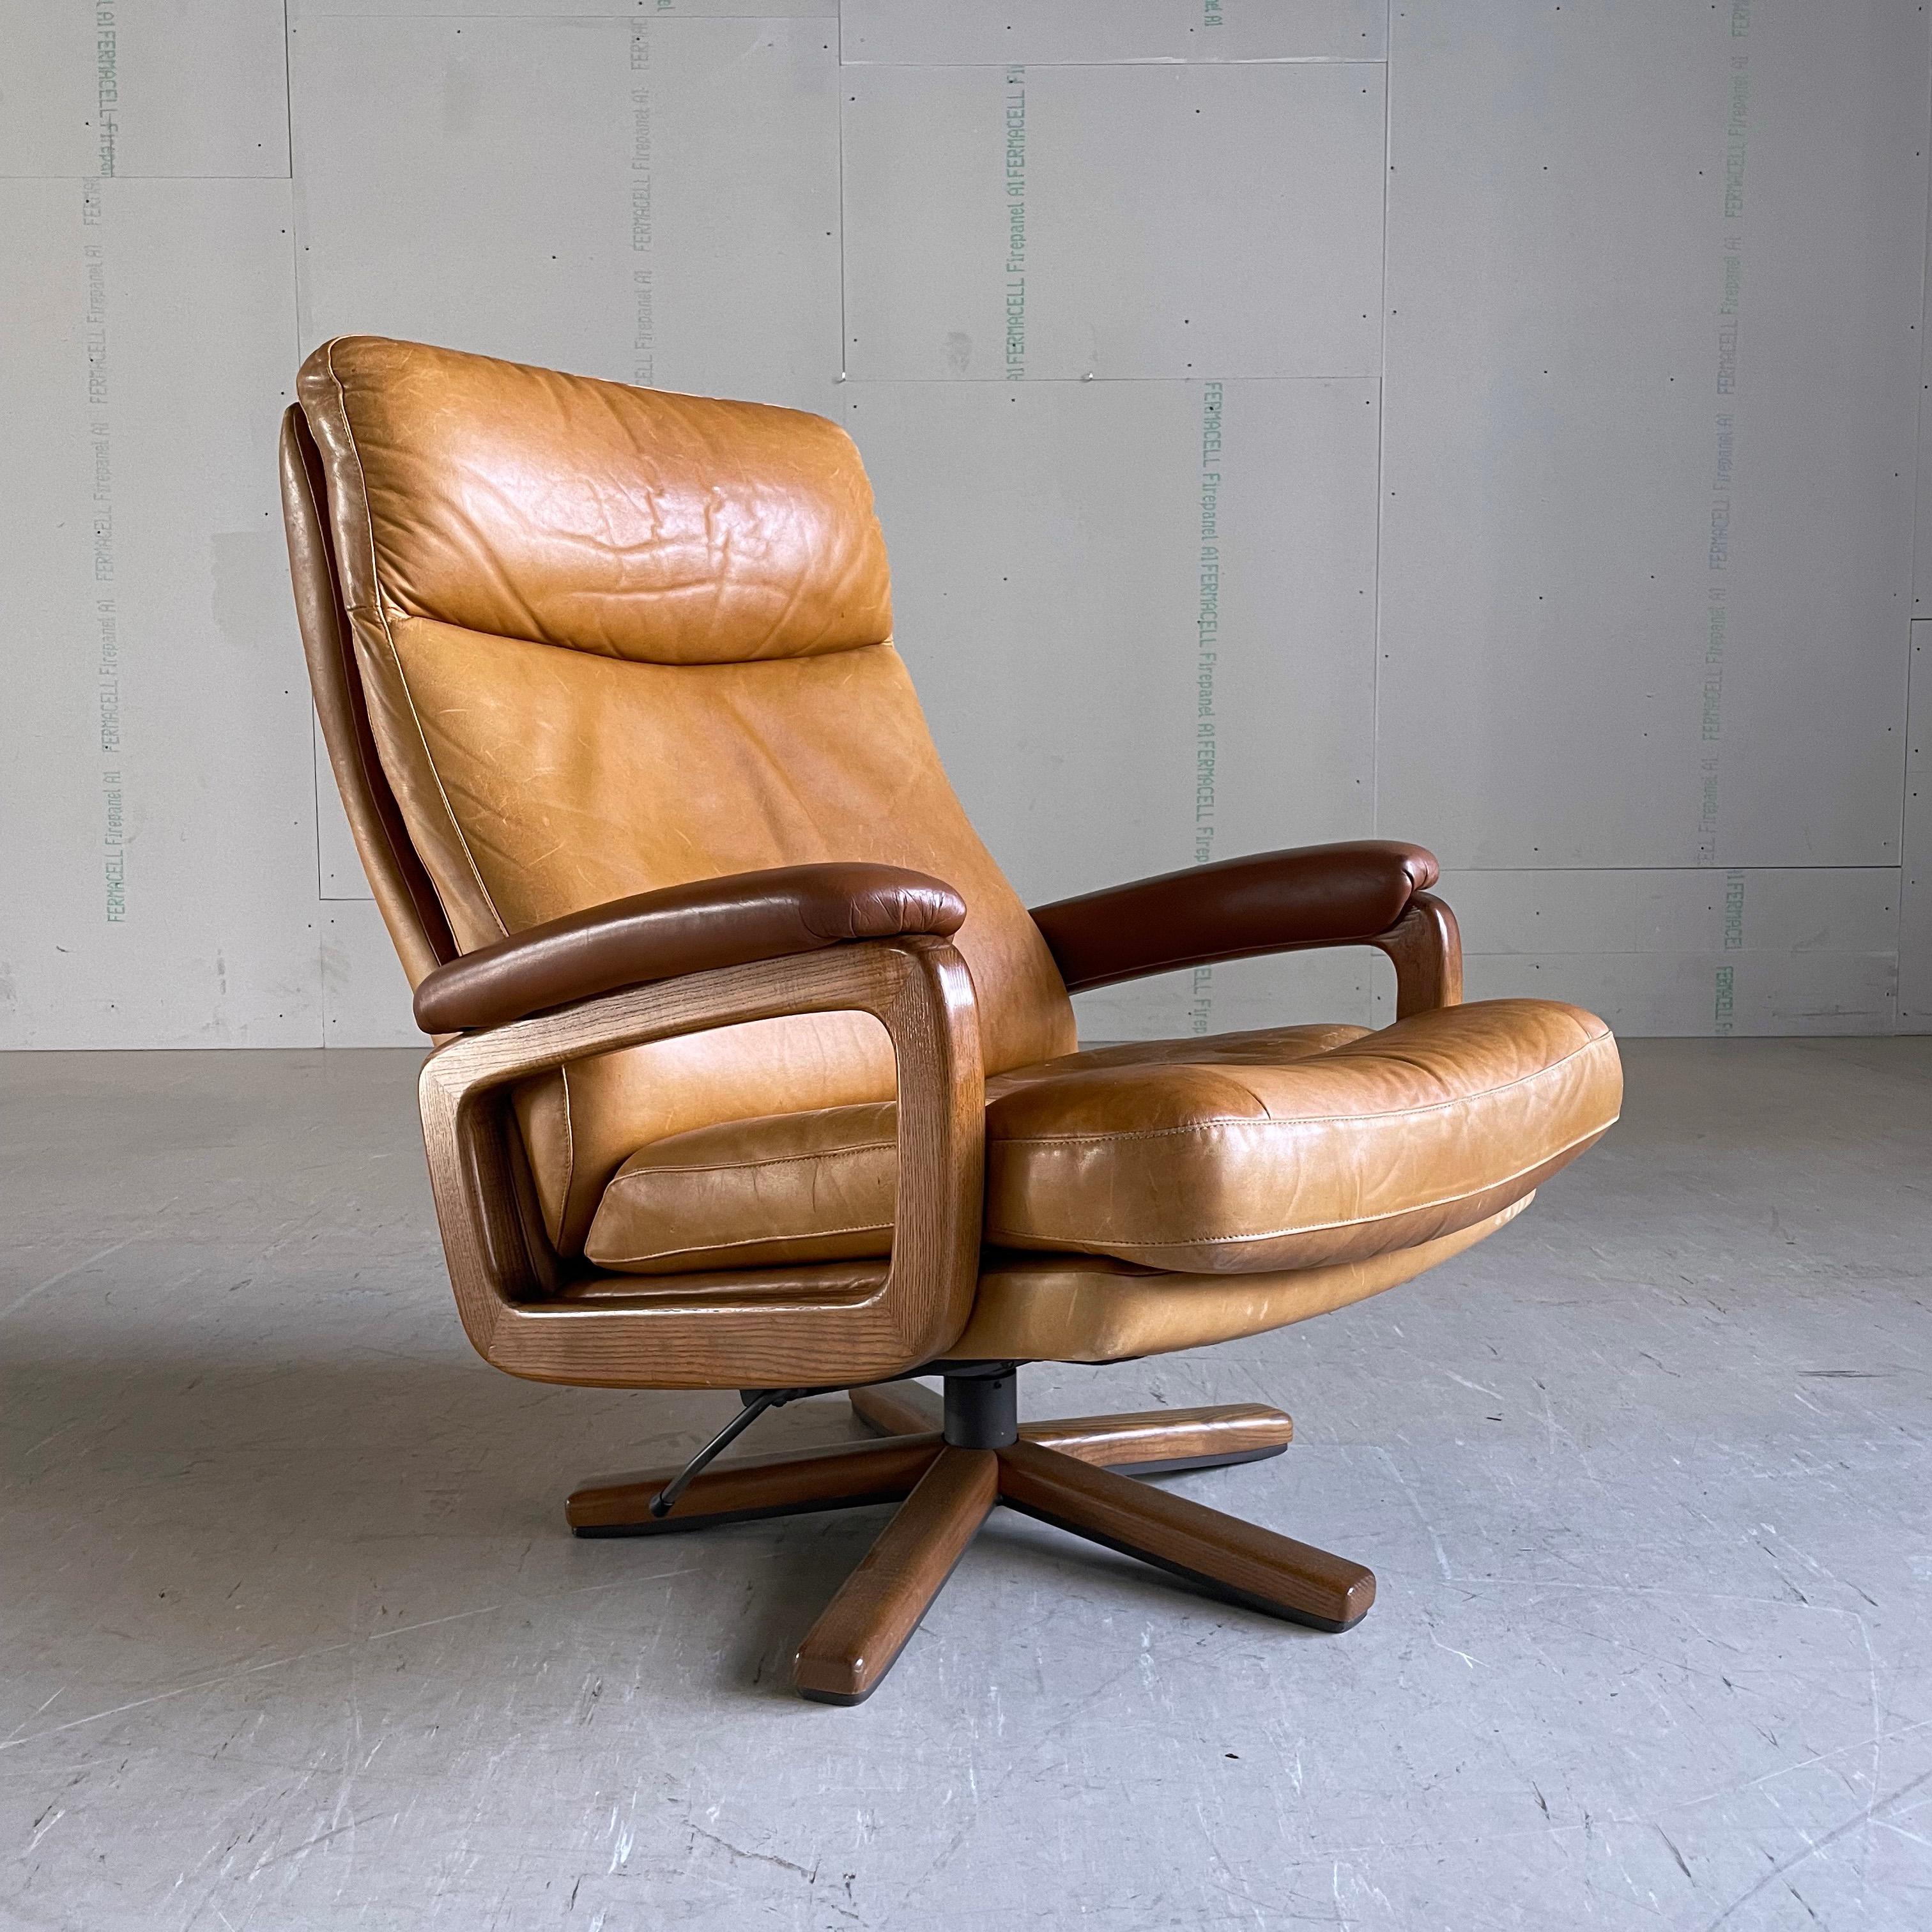 1960’s Reclining leather Lounge Chair in tanned leather. Oak swivel base and arms. Designed by André Vandenbeuck and produced by Strässle, Switzerland.
Measurements: Height: 80 cm  Width: 78cm  Depth: 70cm  Seat Height: ca. 40cm.
Both the leather